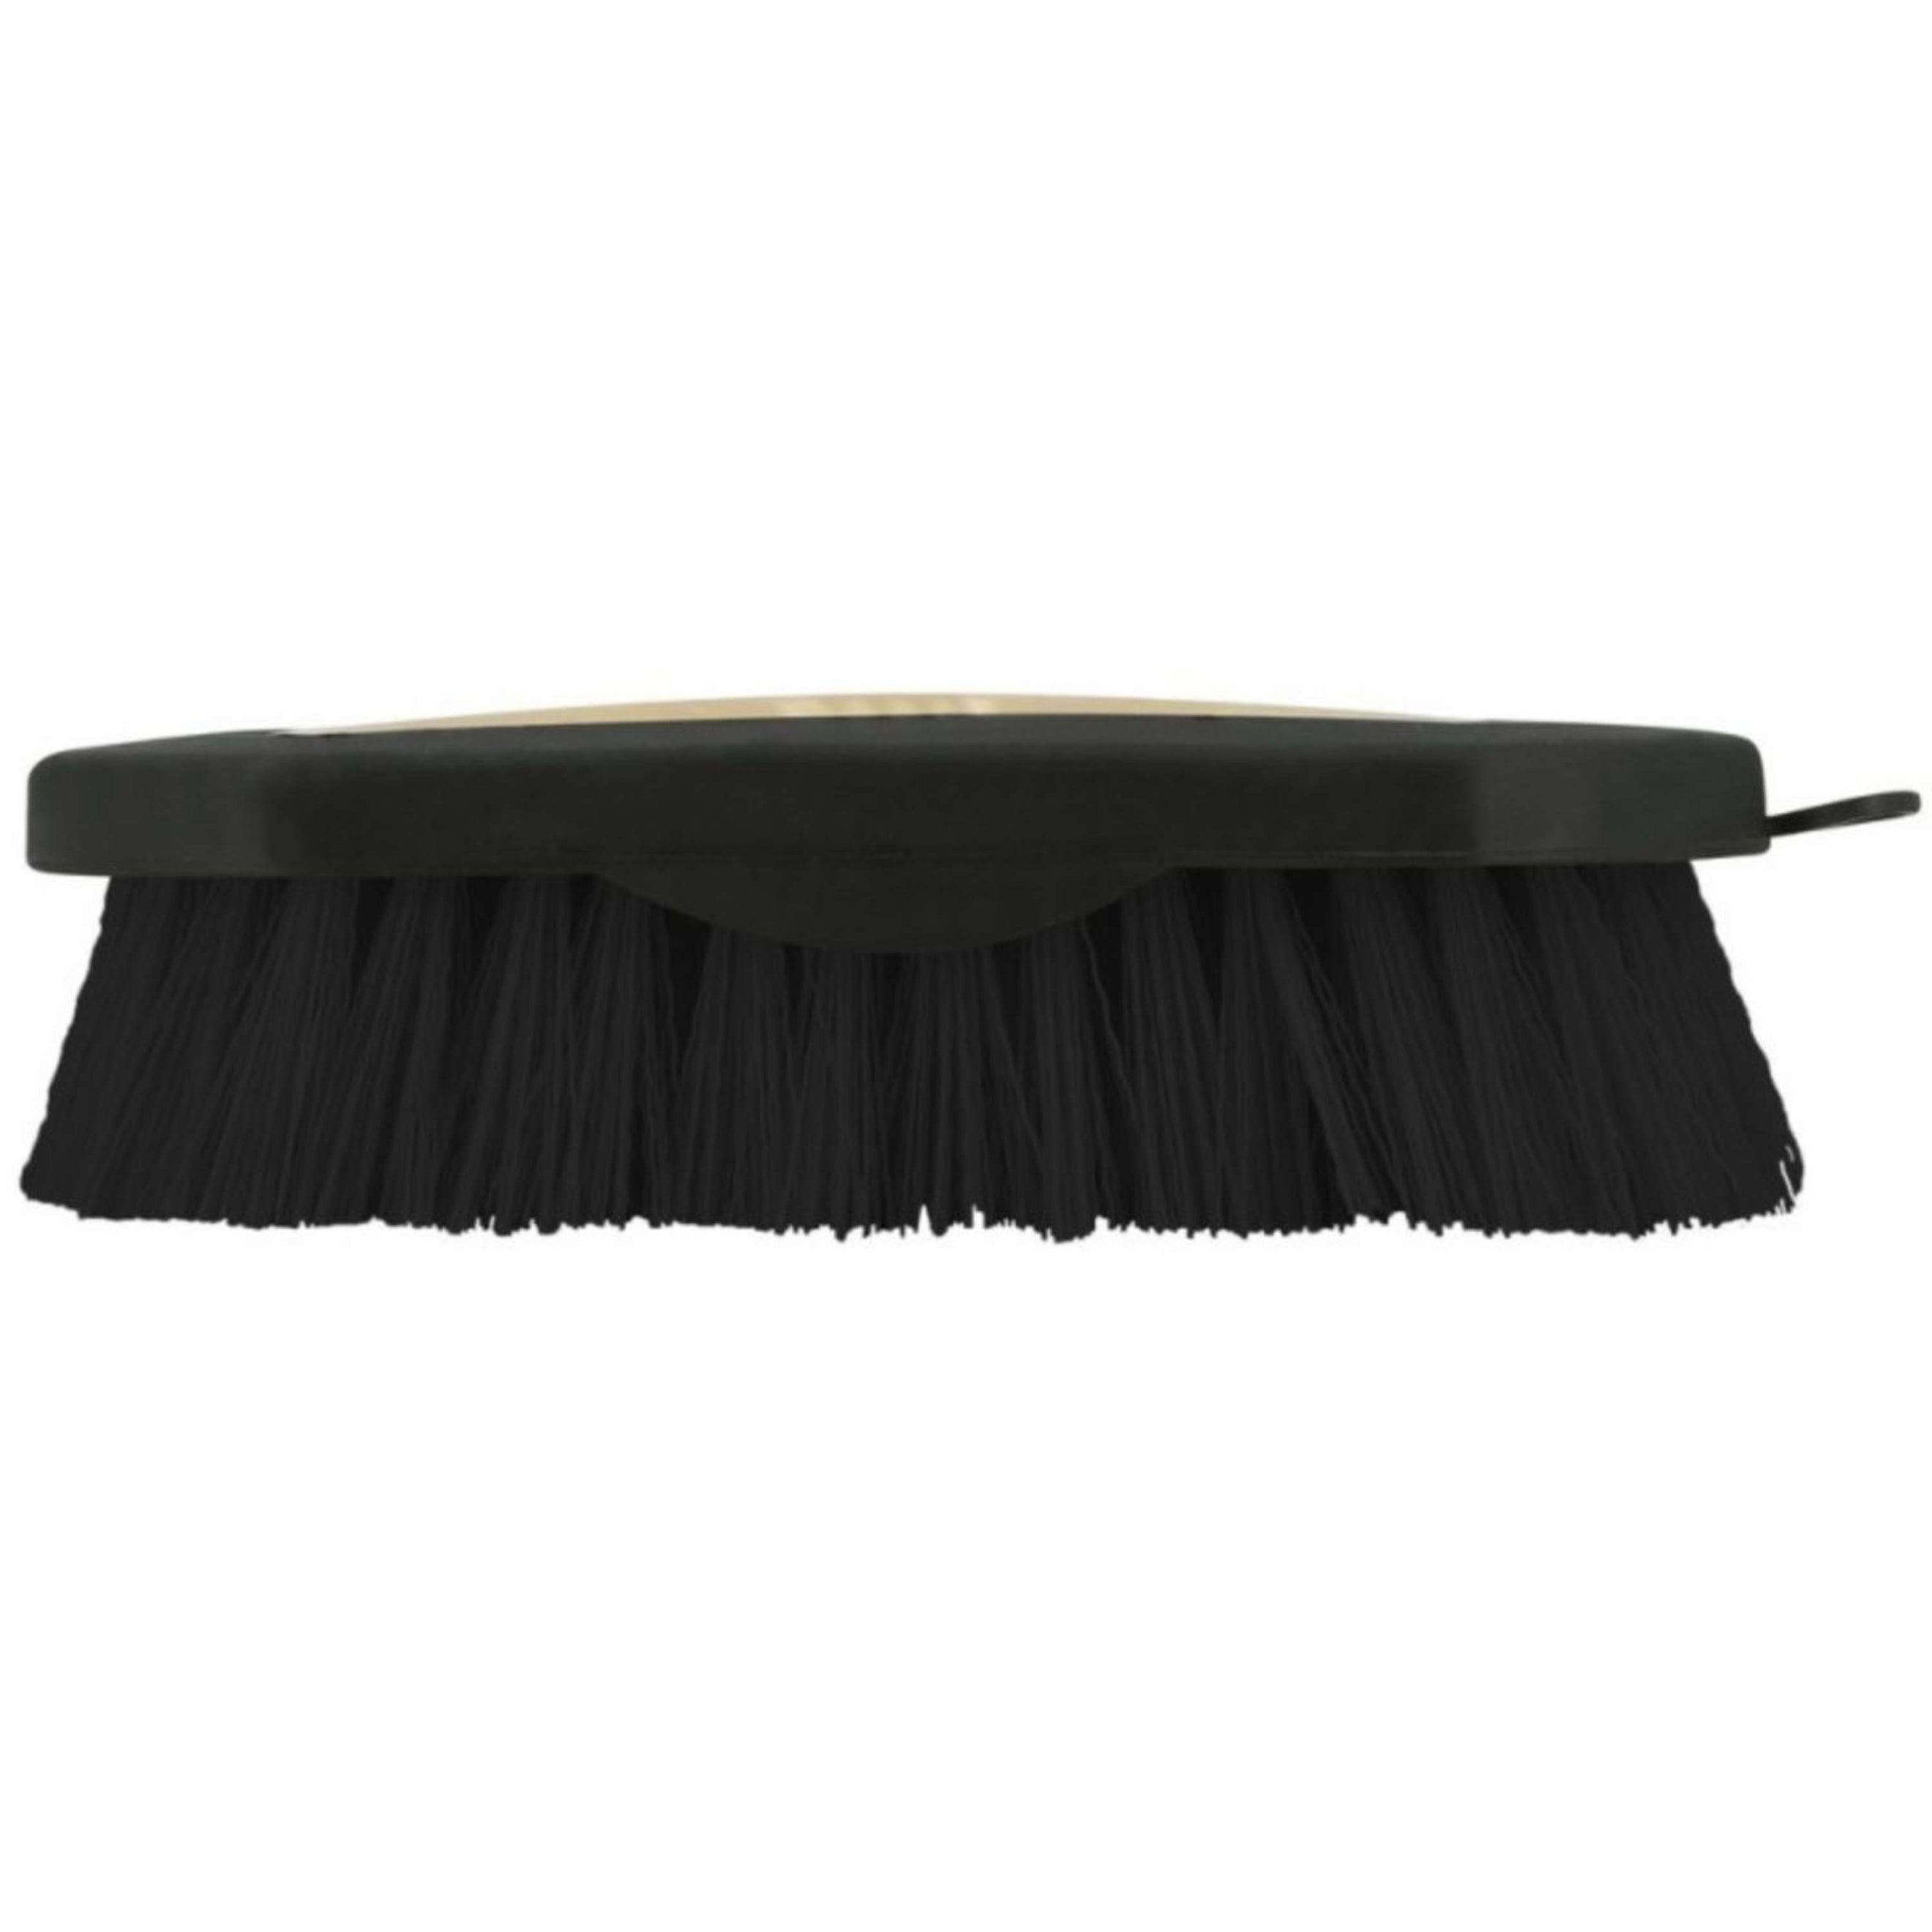 Hippotonic Brosse de Toilettage Glossy Or